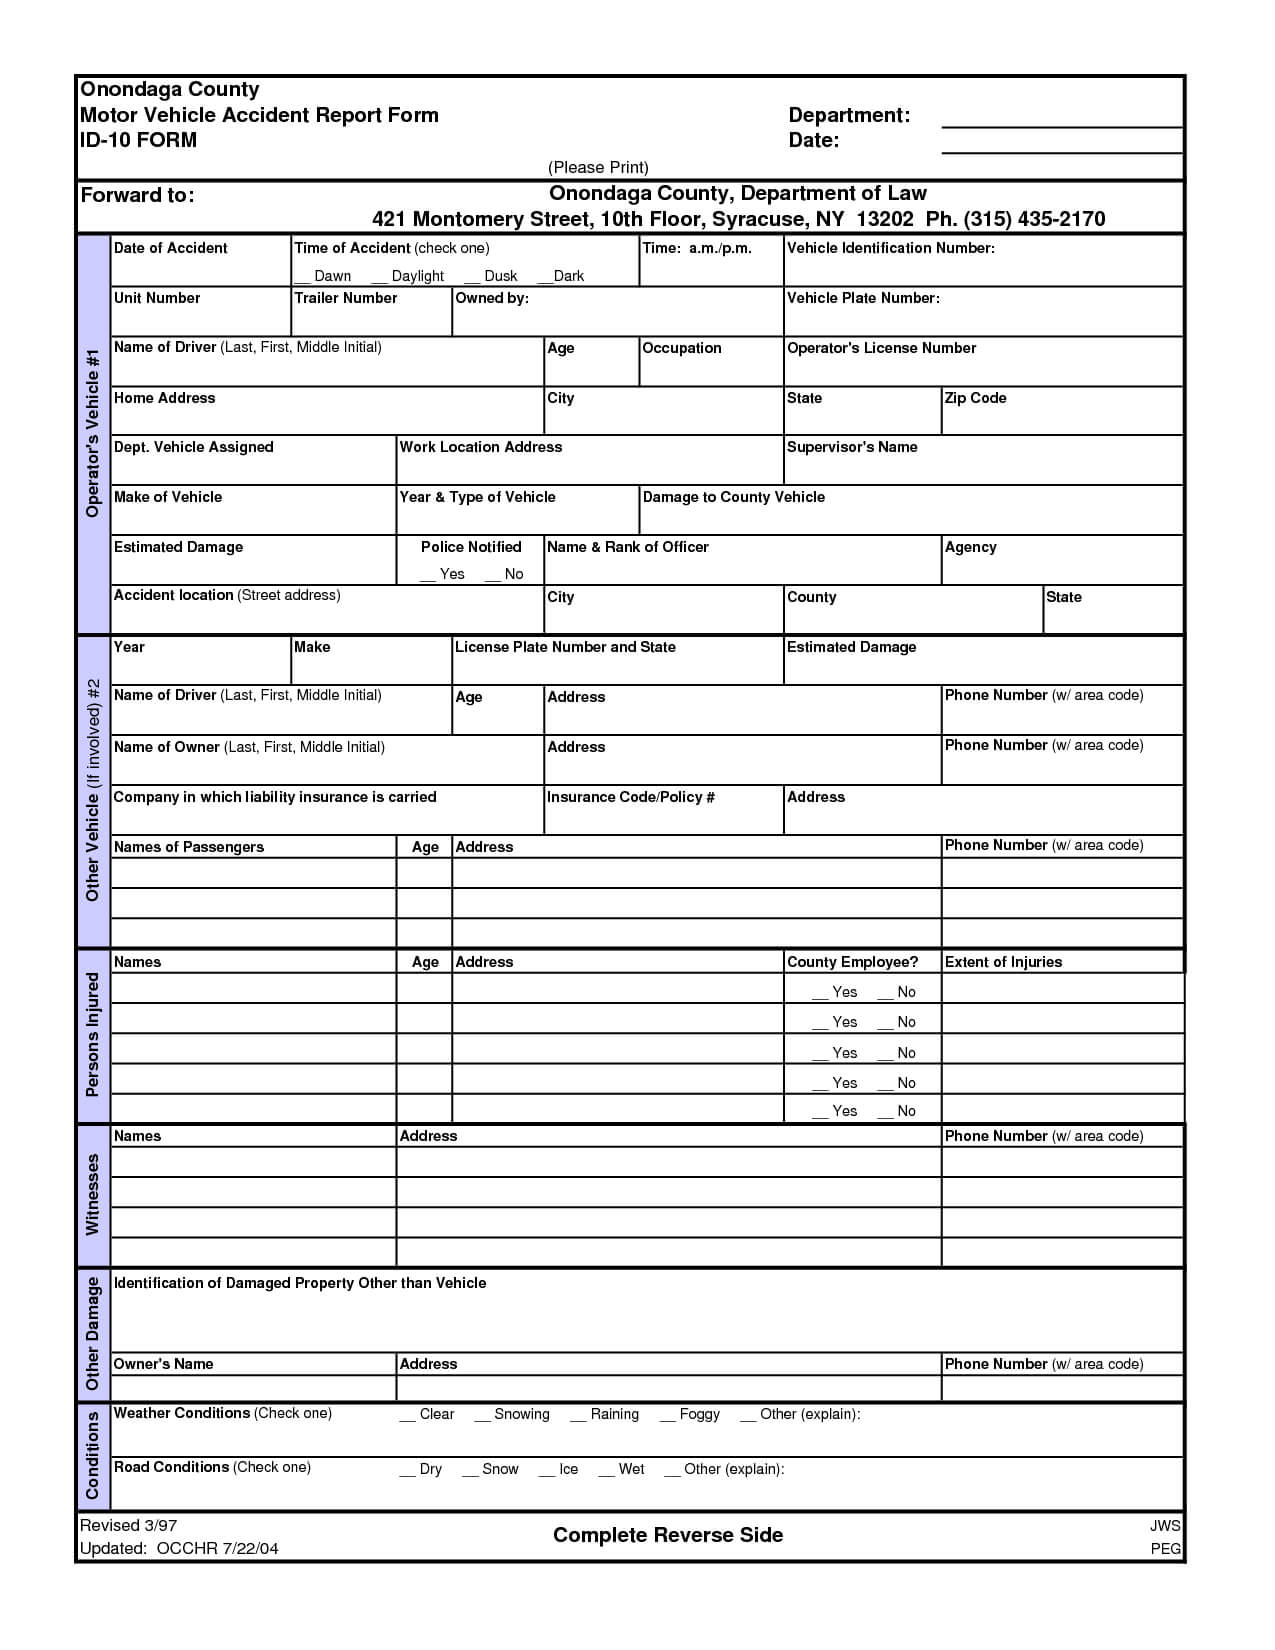 Phenomenal Automobile Accident Report Form Template Ideas Intended For Vehicle Accident Report Template